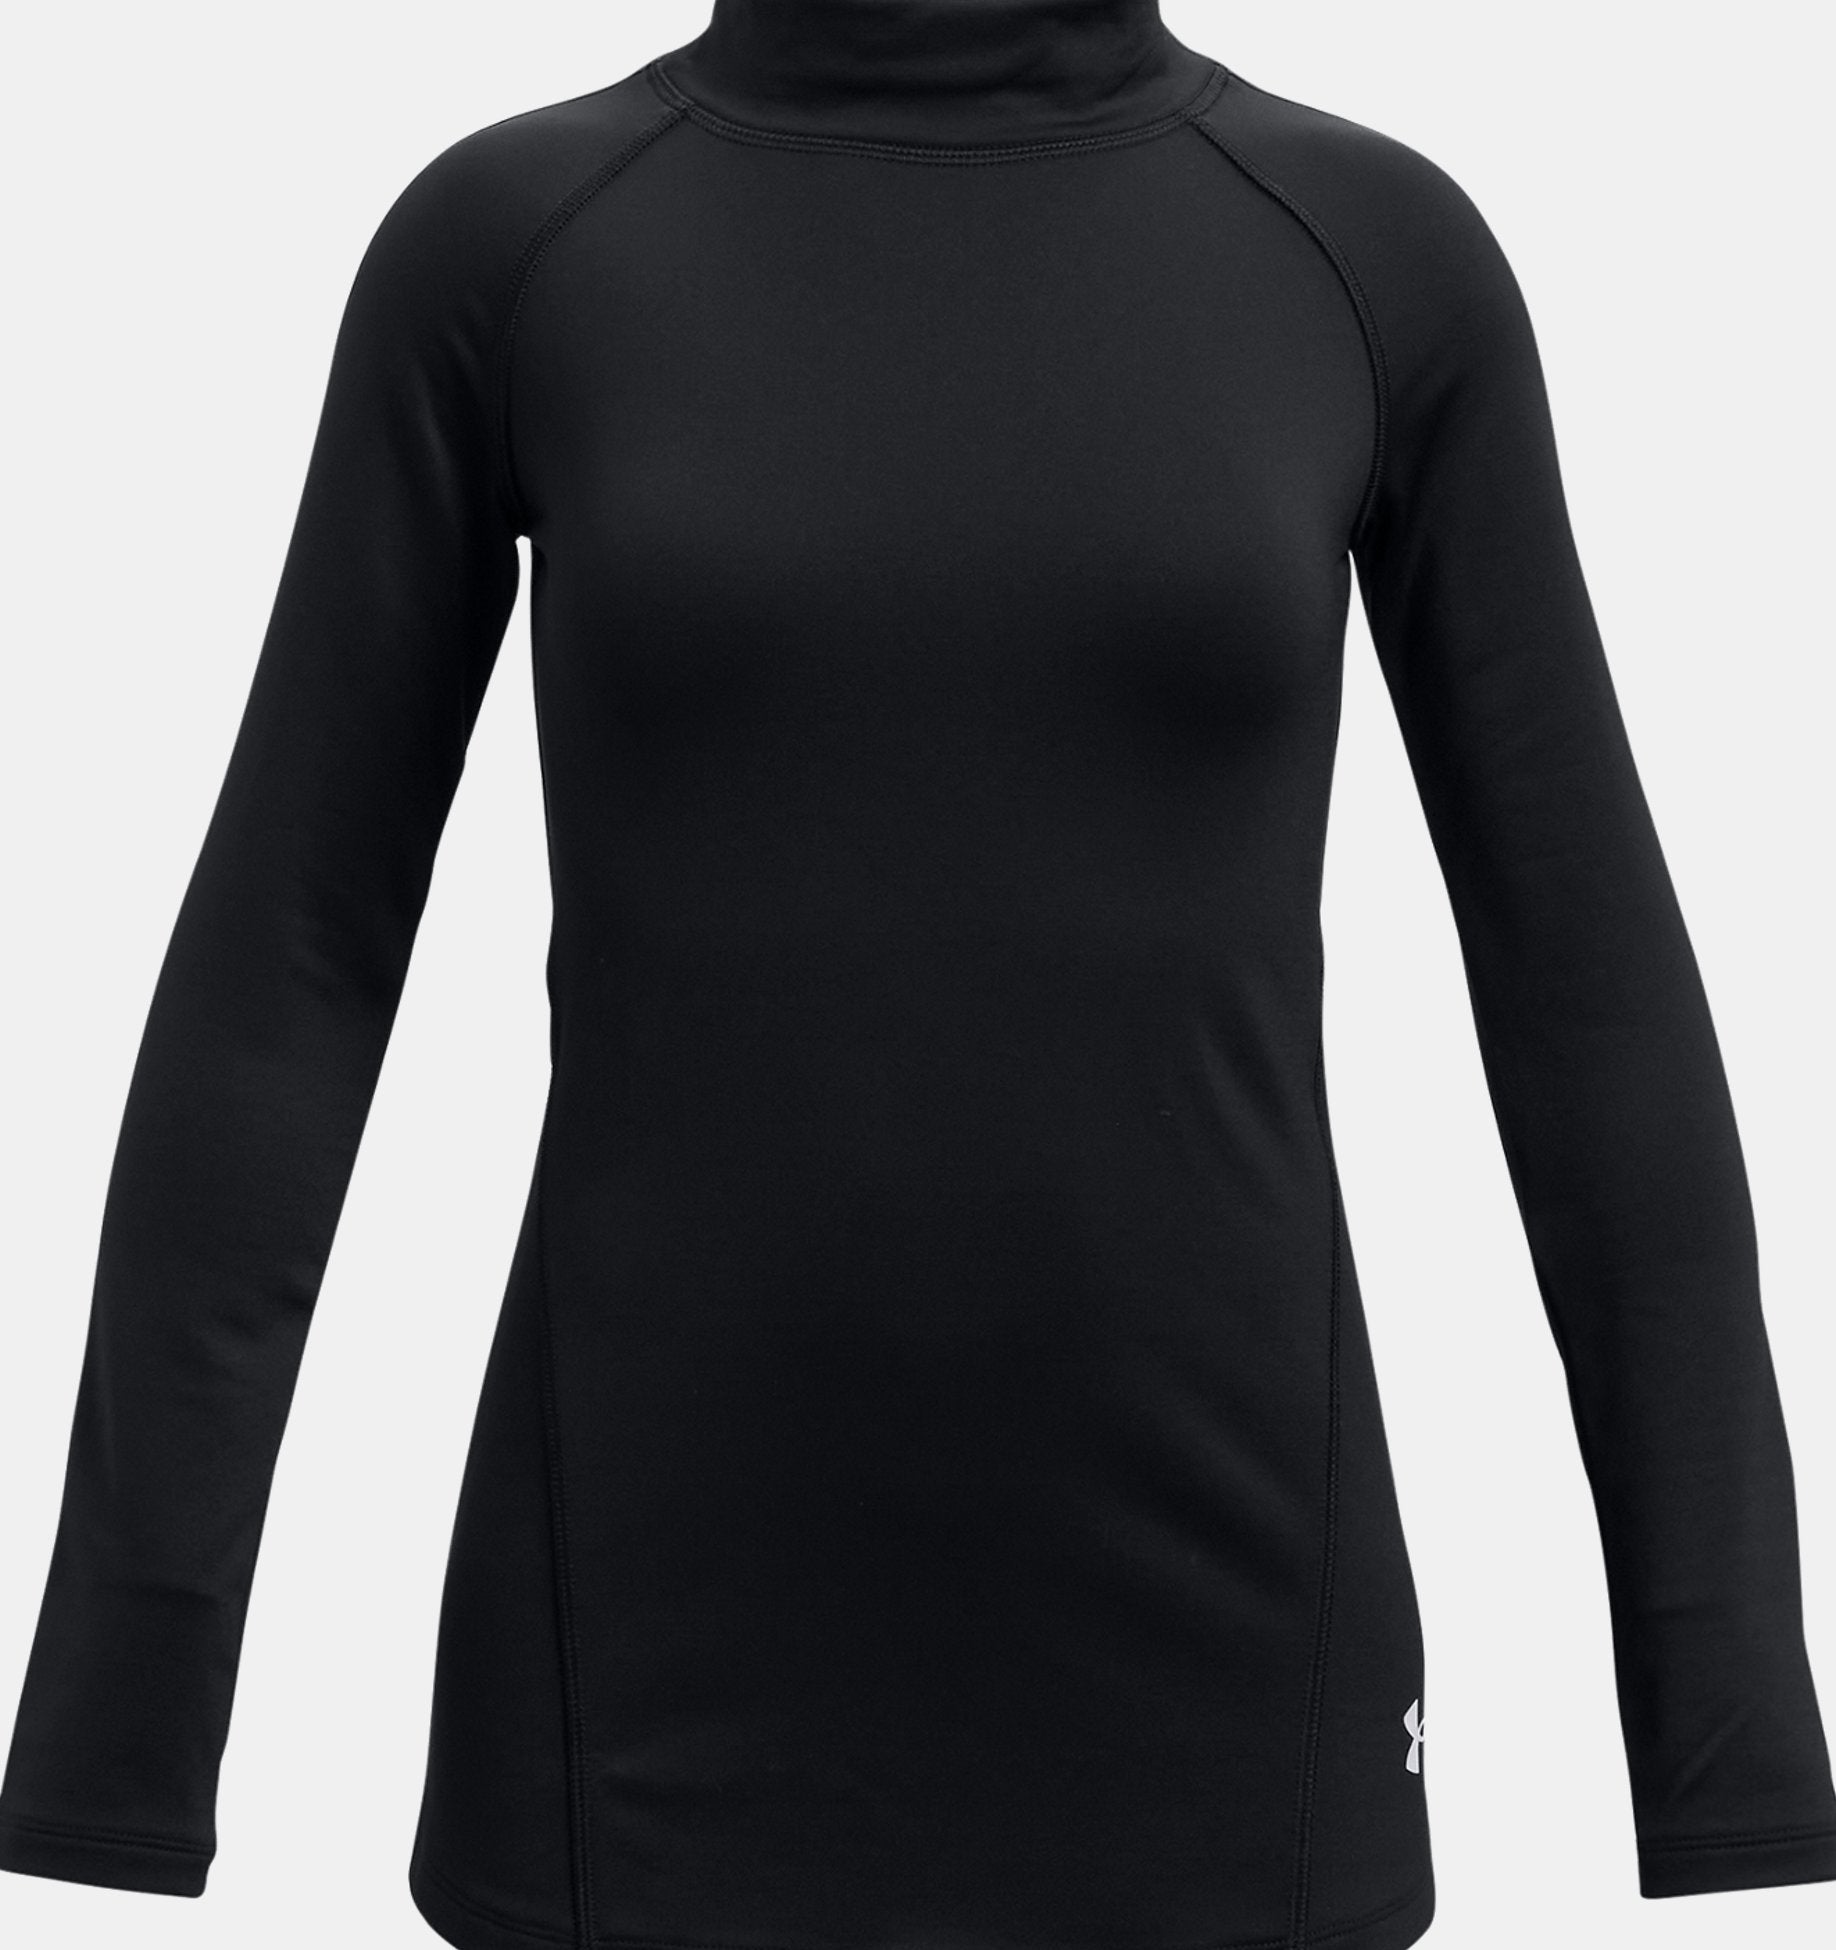 UNDER ARMOUR coldgear womens mock neck long sleeve pull over fitted shirt  med